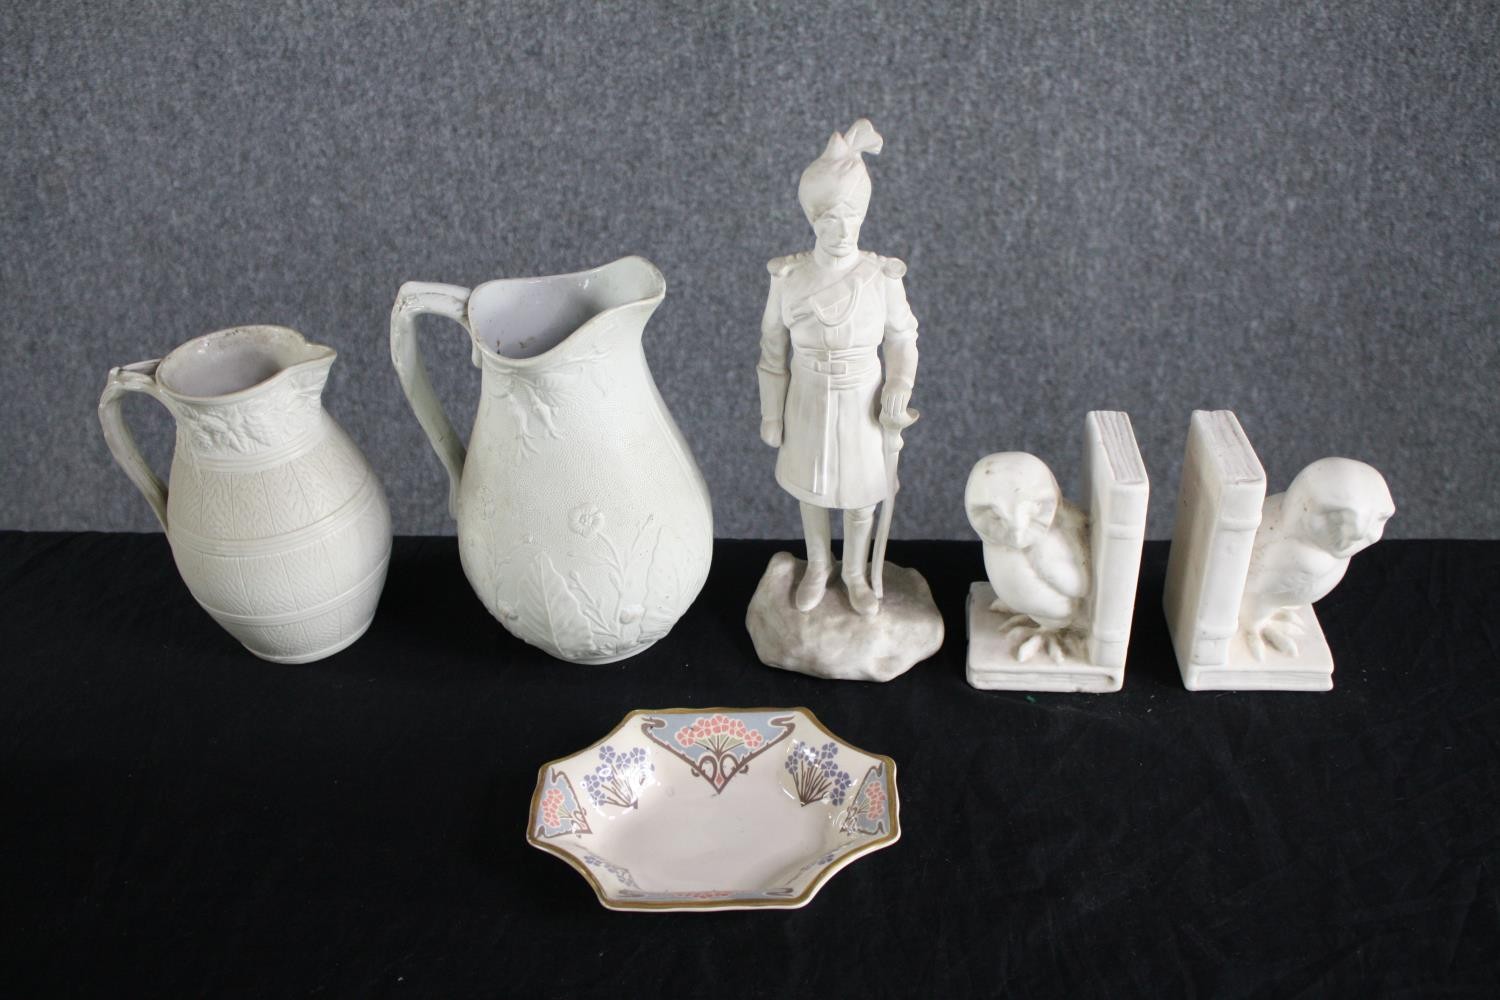 A small Liberty store dish, a pair of owl bookends, a Cobridge Alloa white jug and a sikh soldier